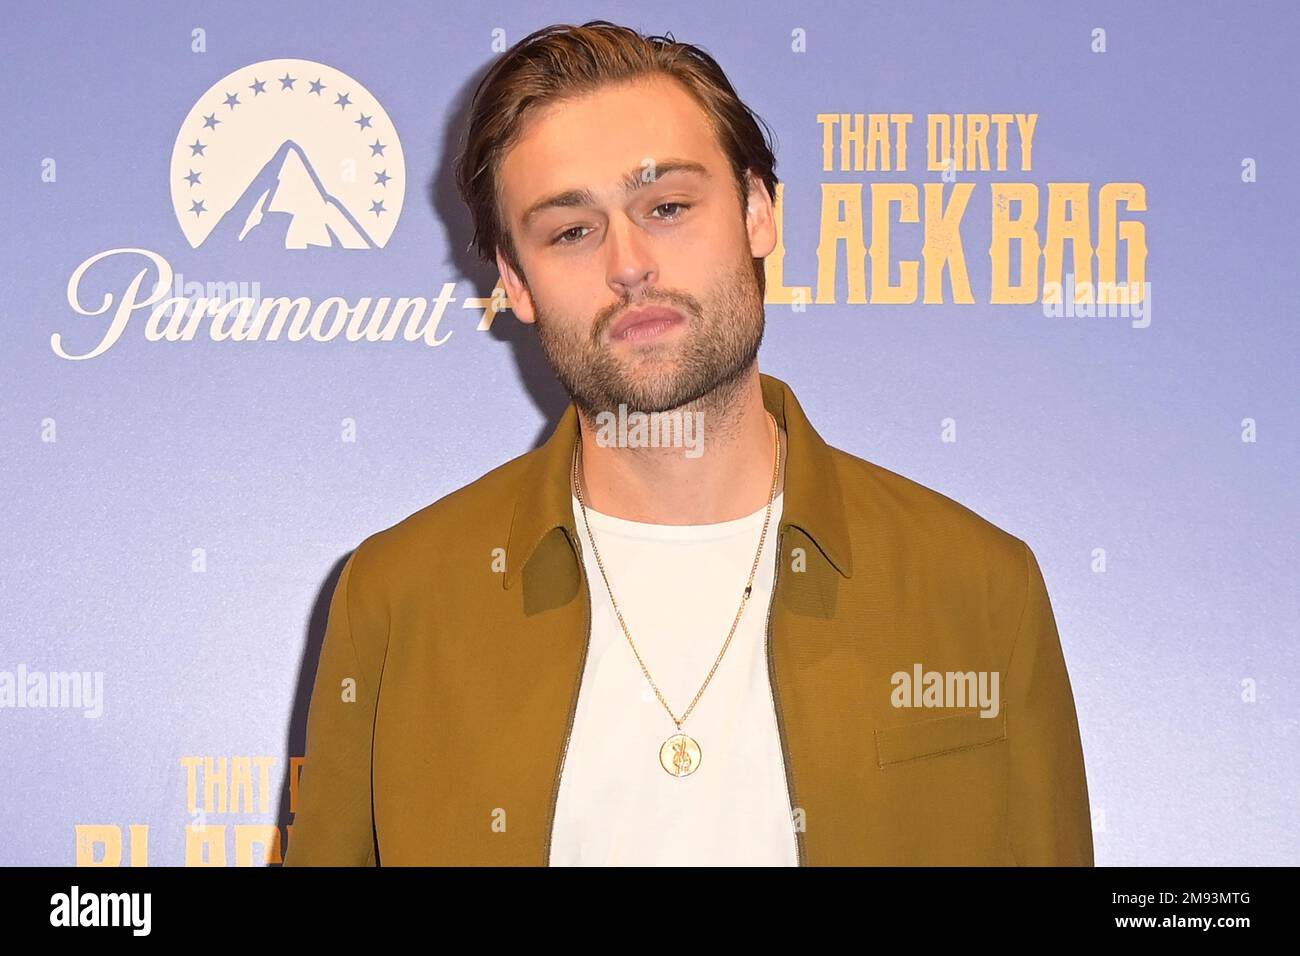 Rome, Italy. 16th Jan, 2023. Douglas Booth attends the photocall of Paramount  series 'That dirty black bag' at The Space Cinema Moderno. (Photo by Mario Cartelli/SOPA Images/Sipa USA) Credit: Sipa USA/Alamy Live News Stock Photo